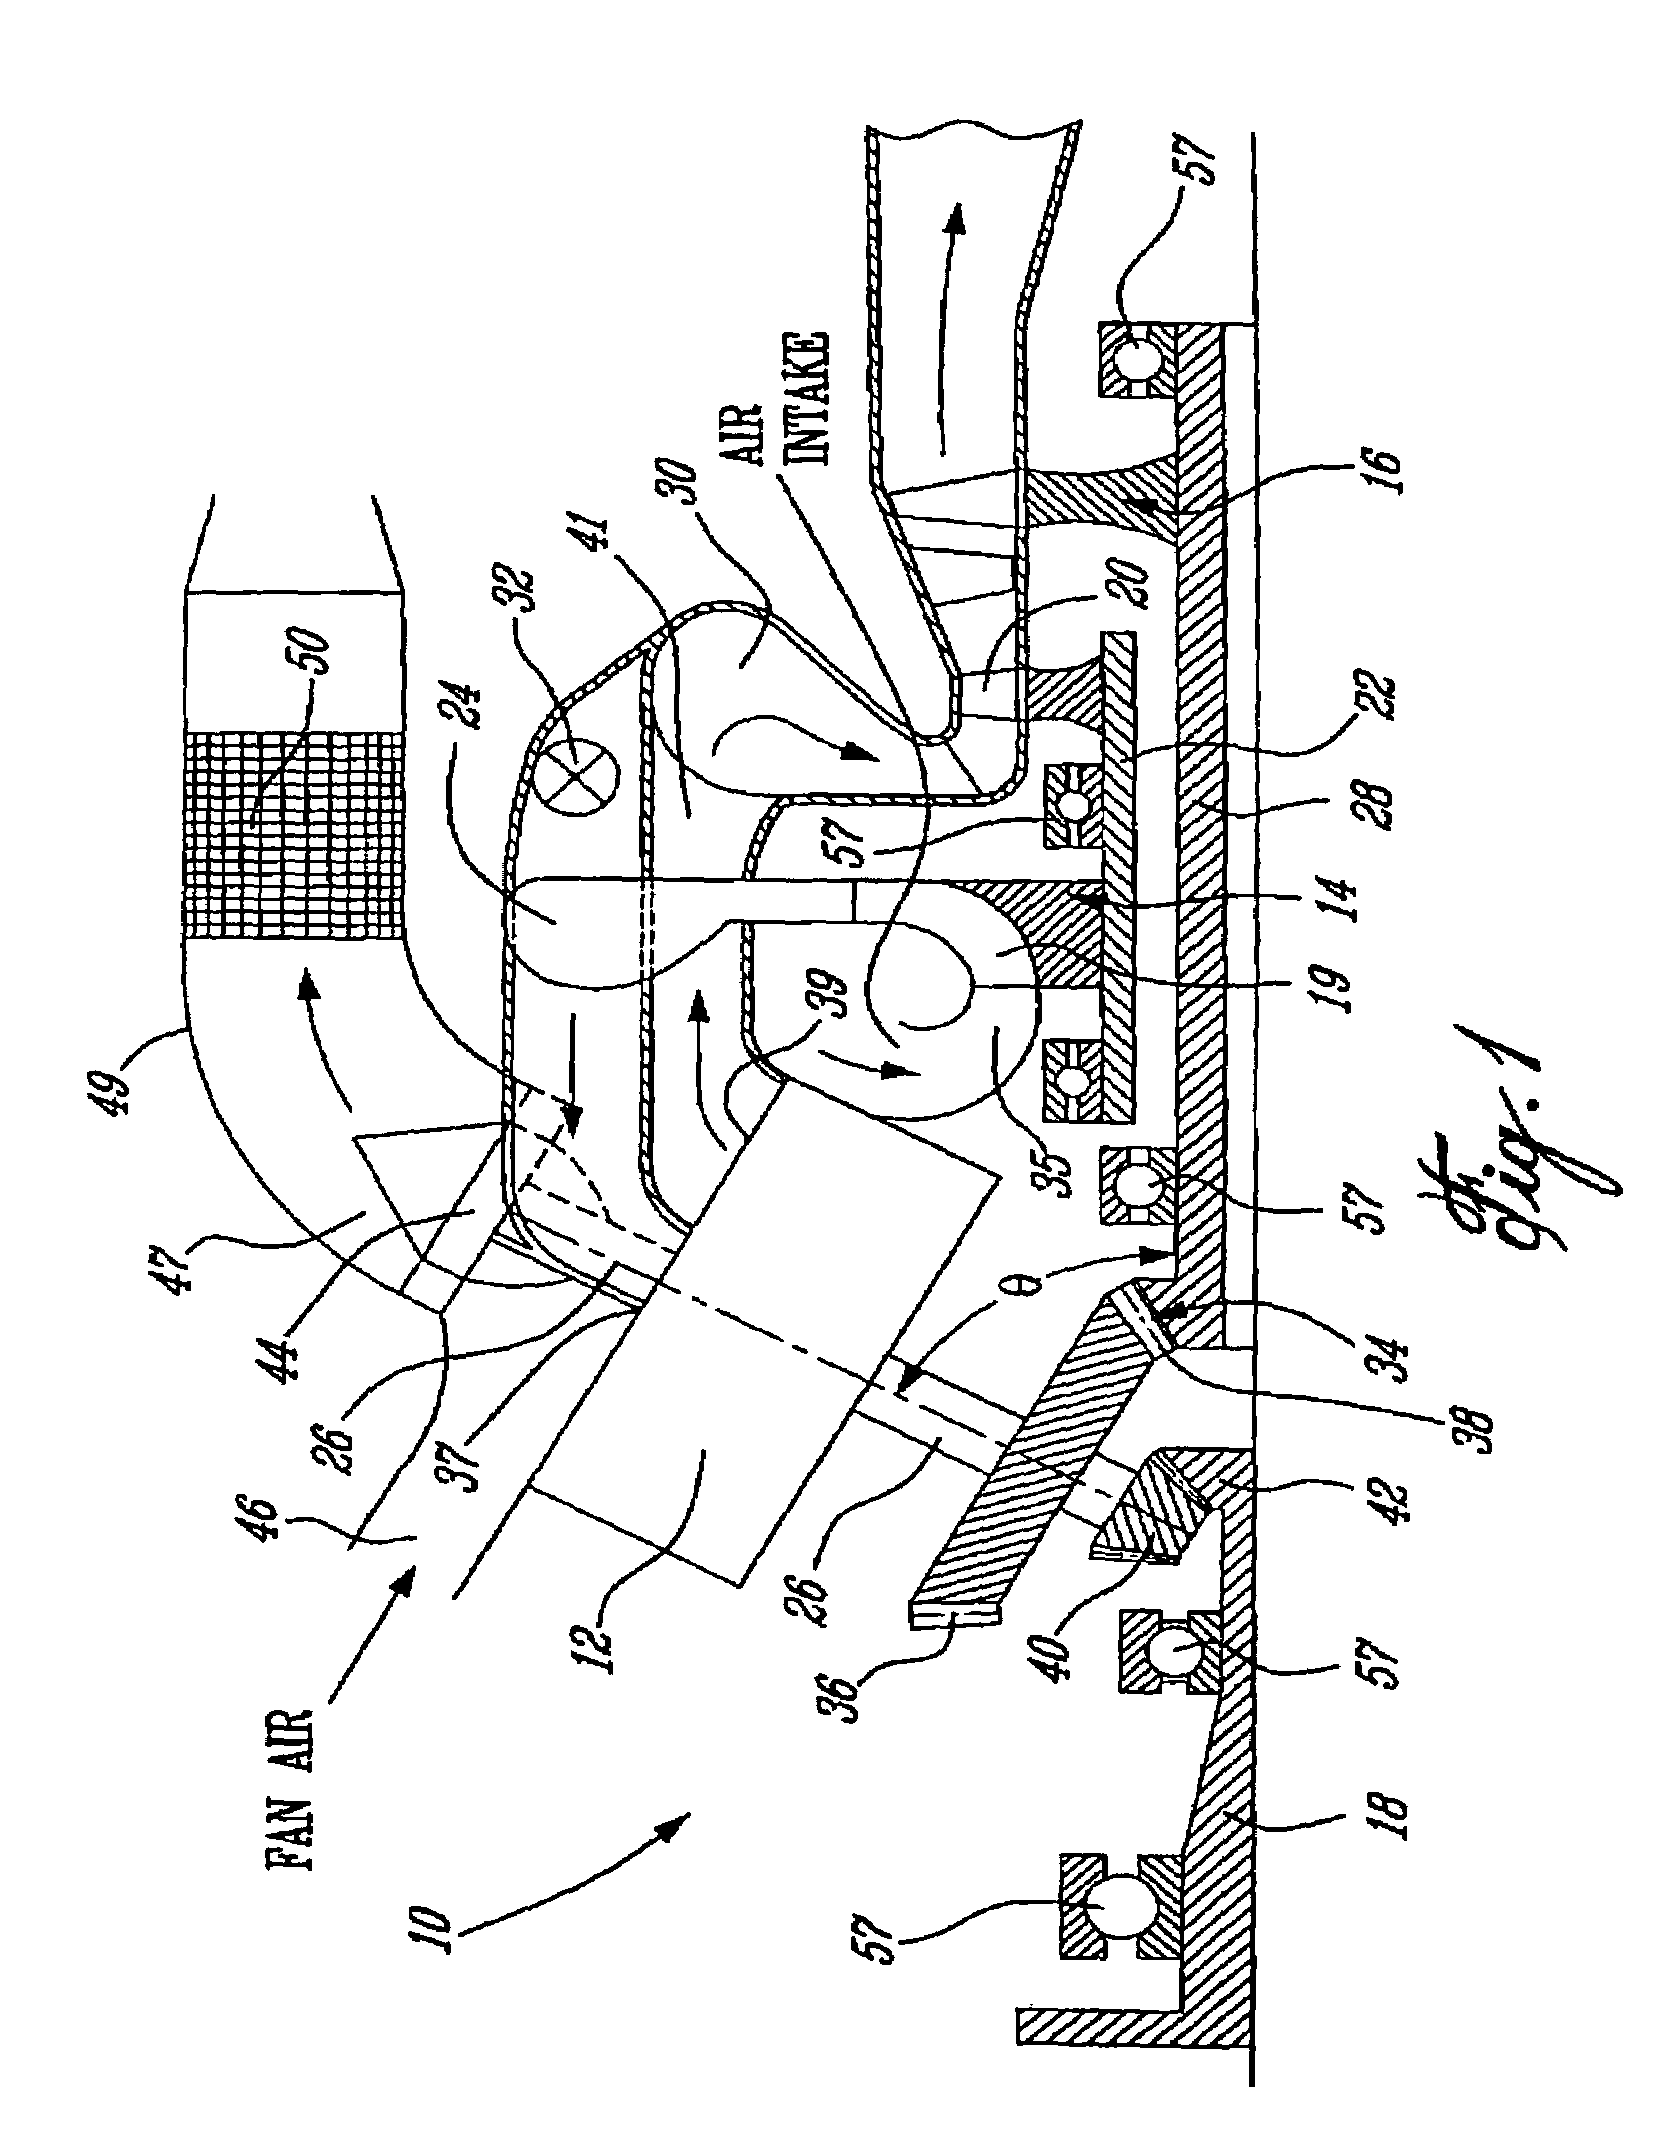 Integral cooling system for rotary engine